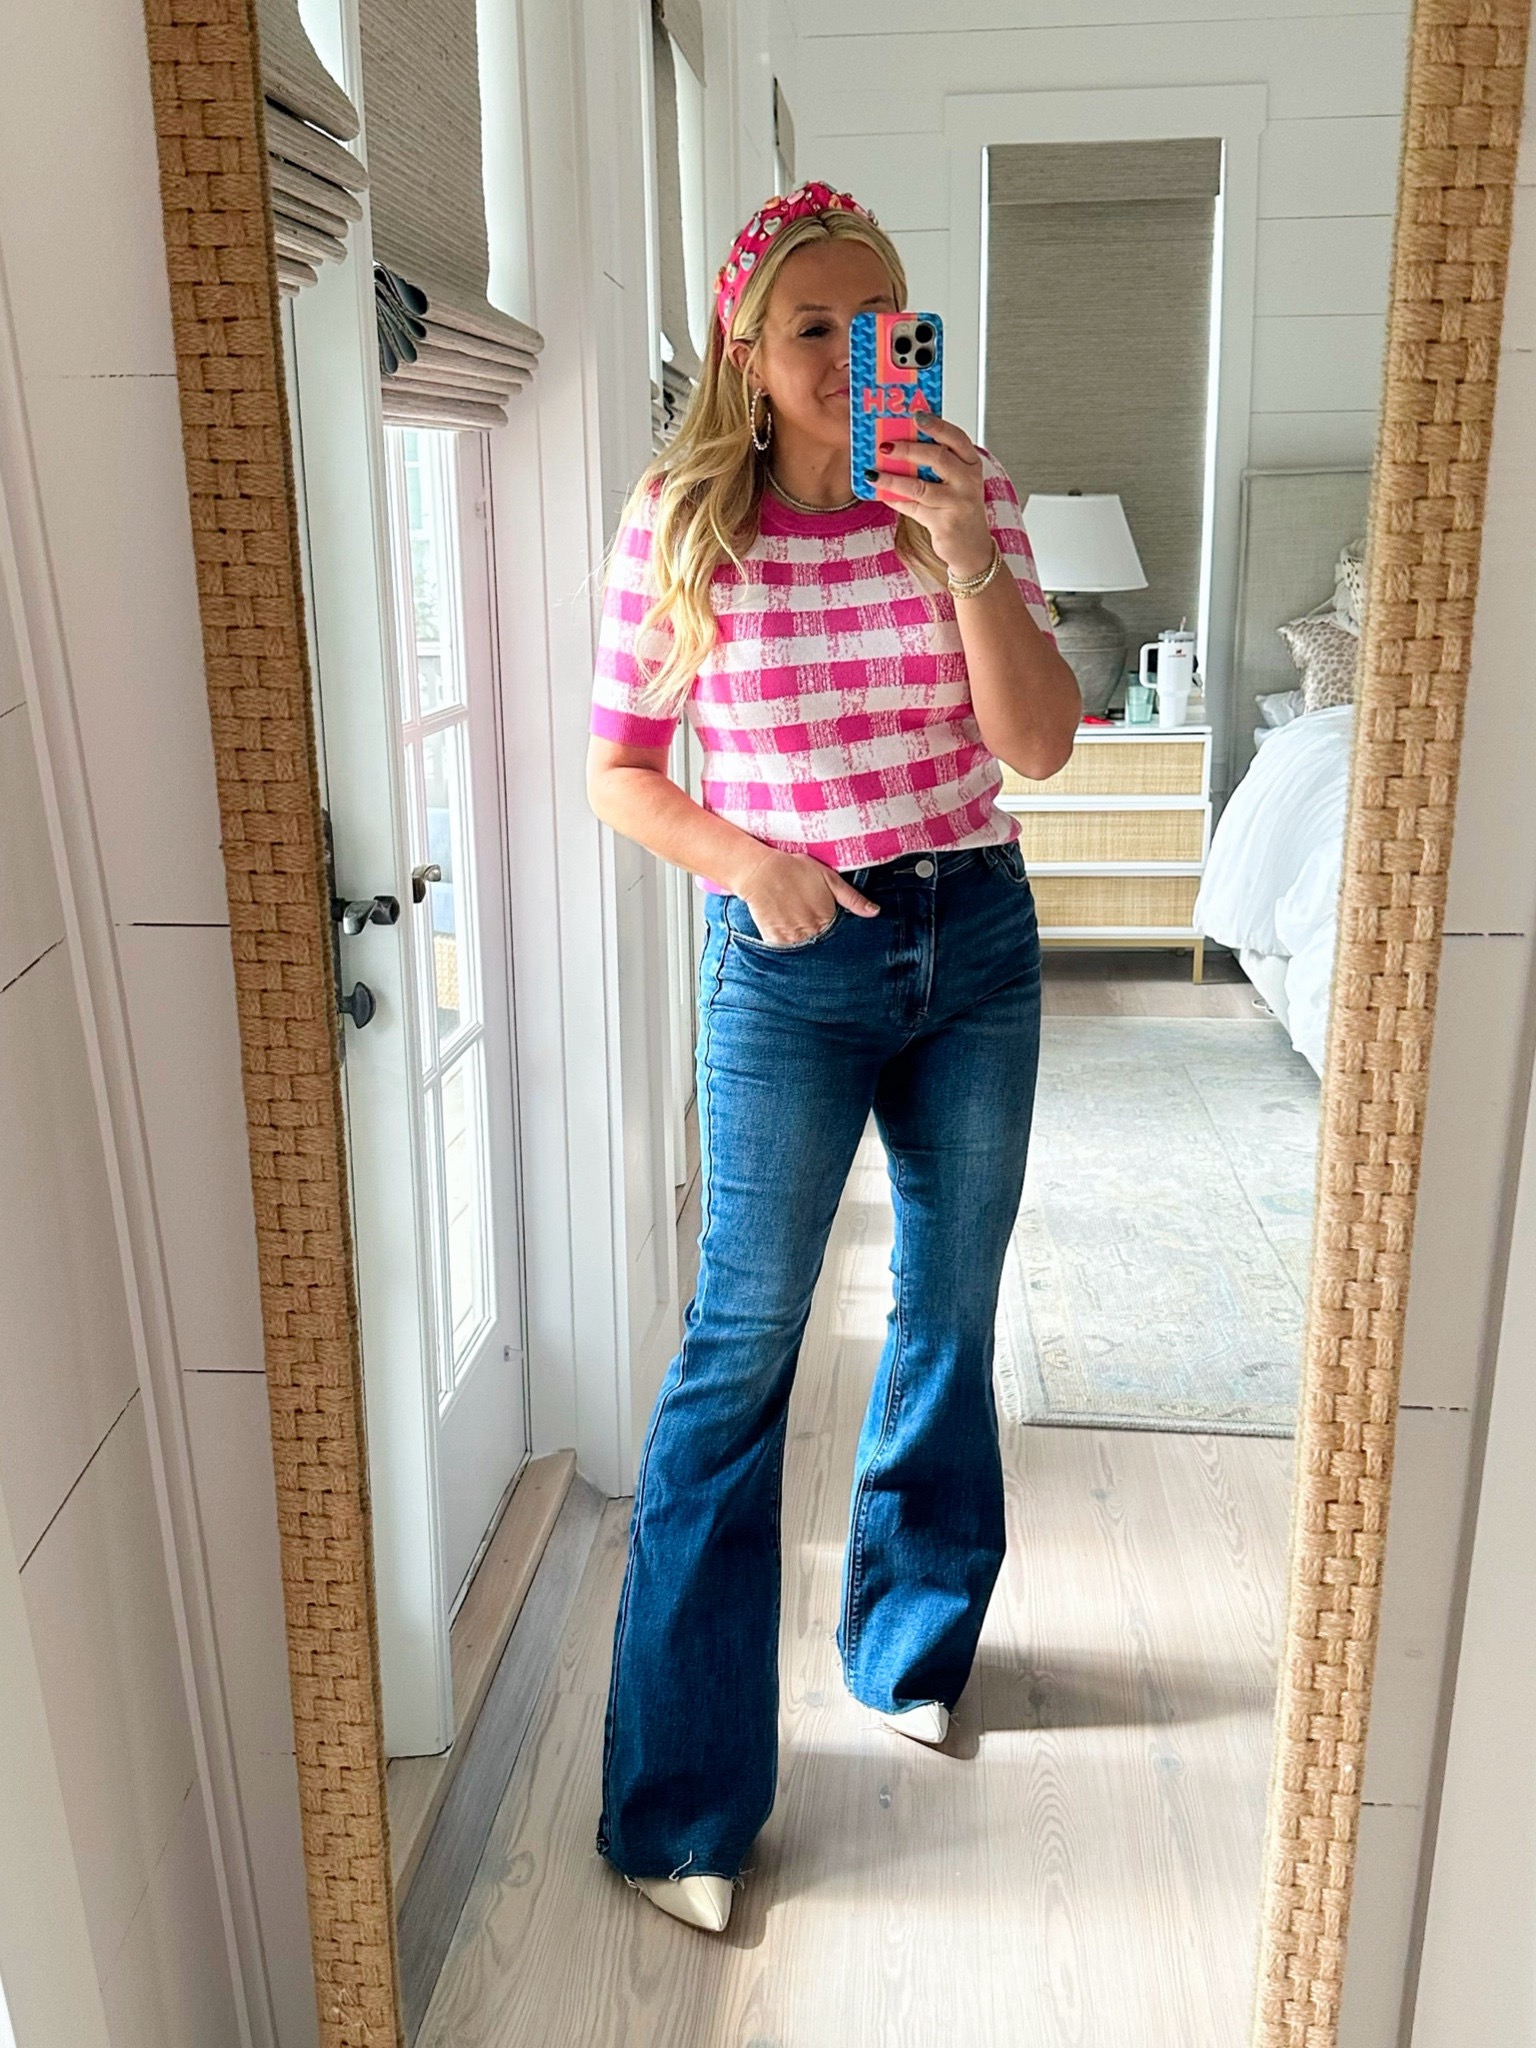 Pink top and jeans